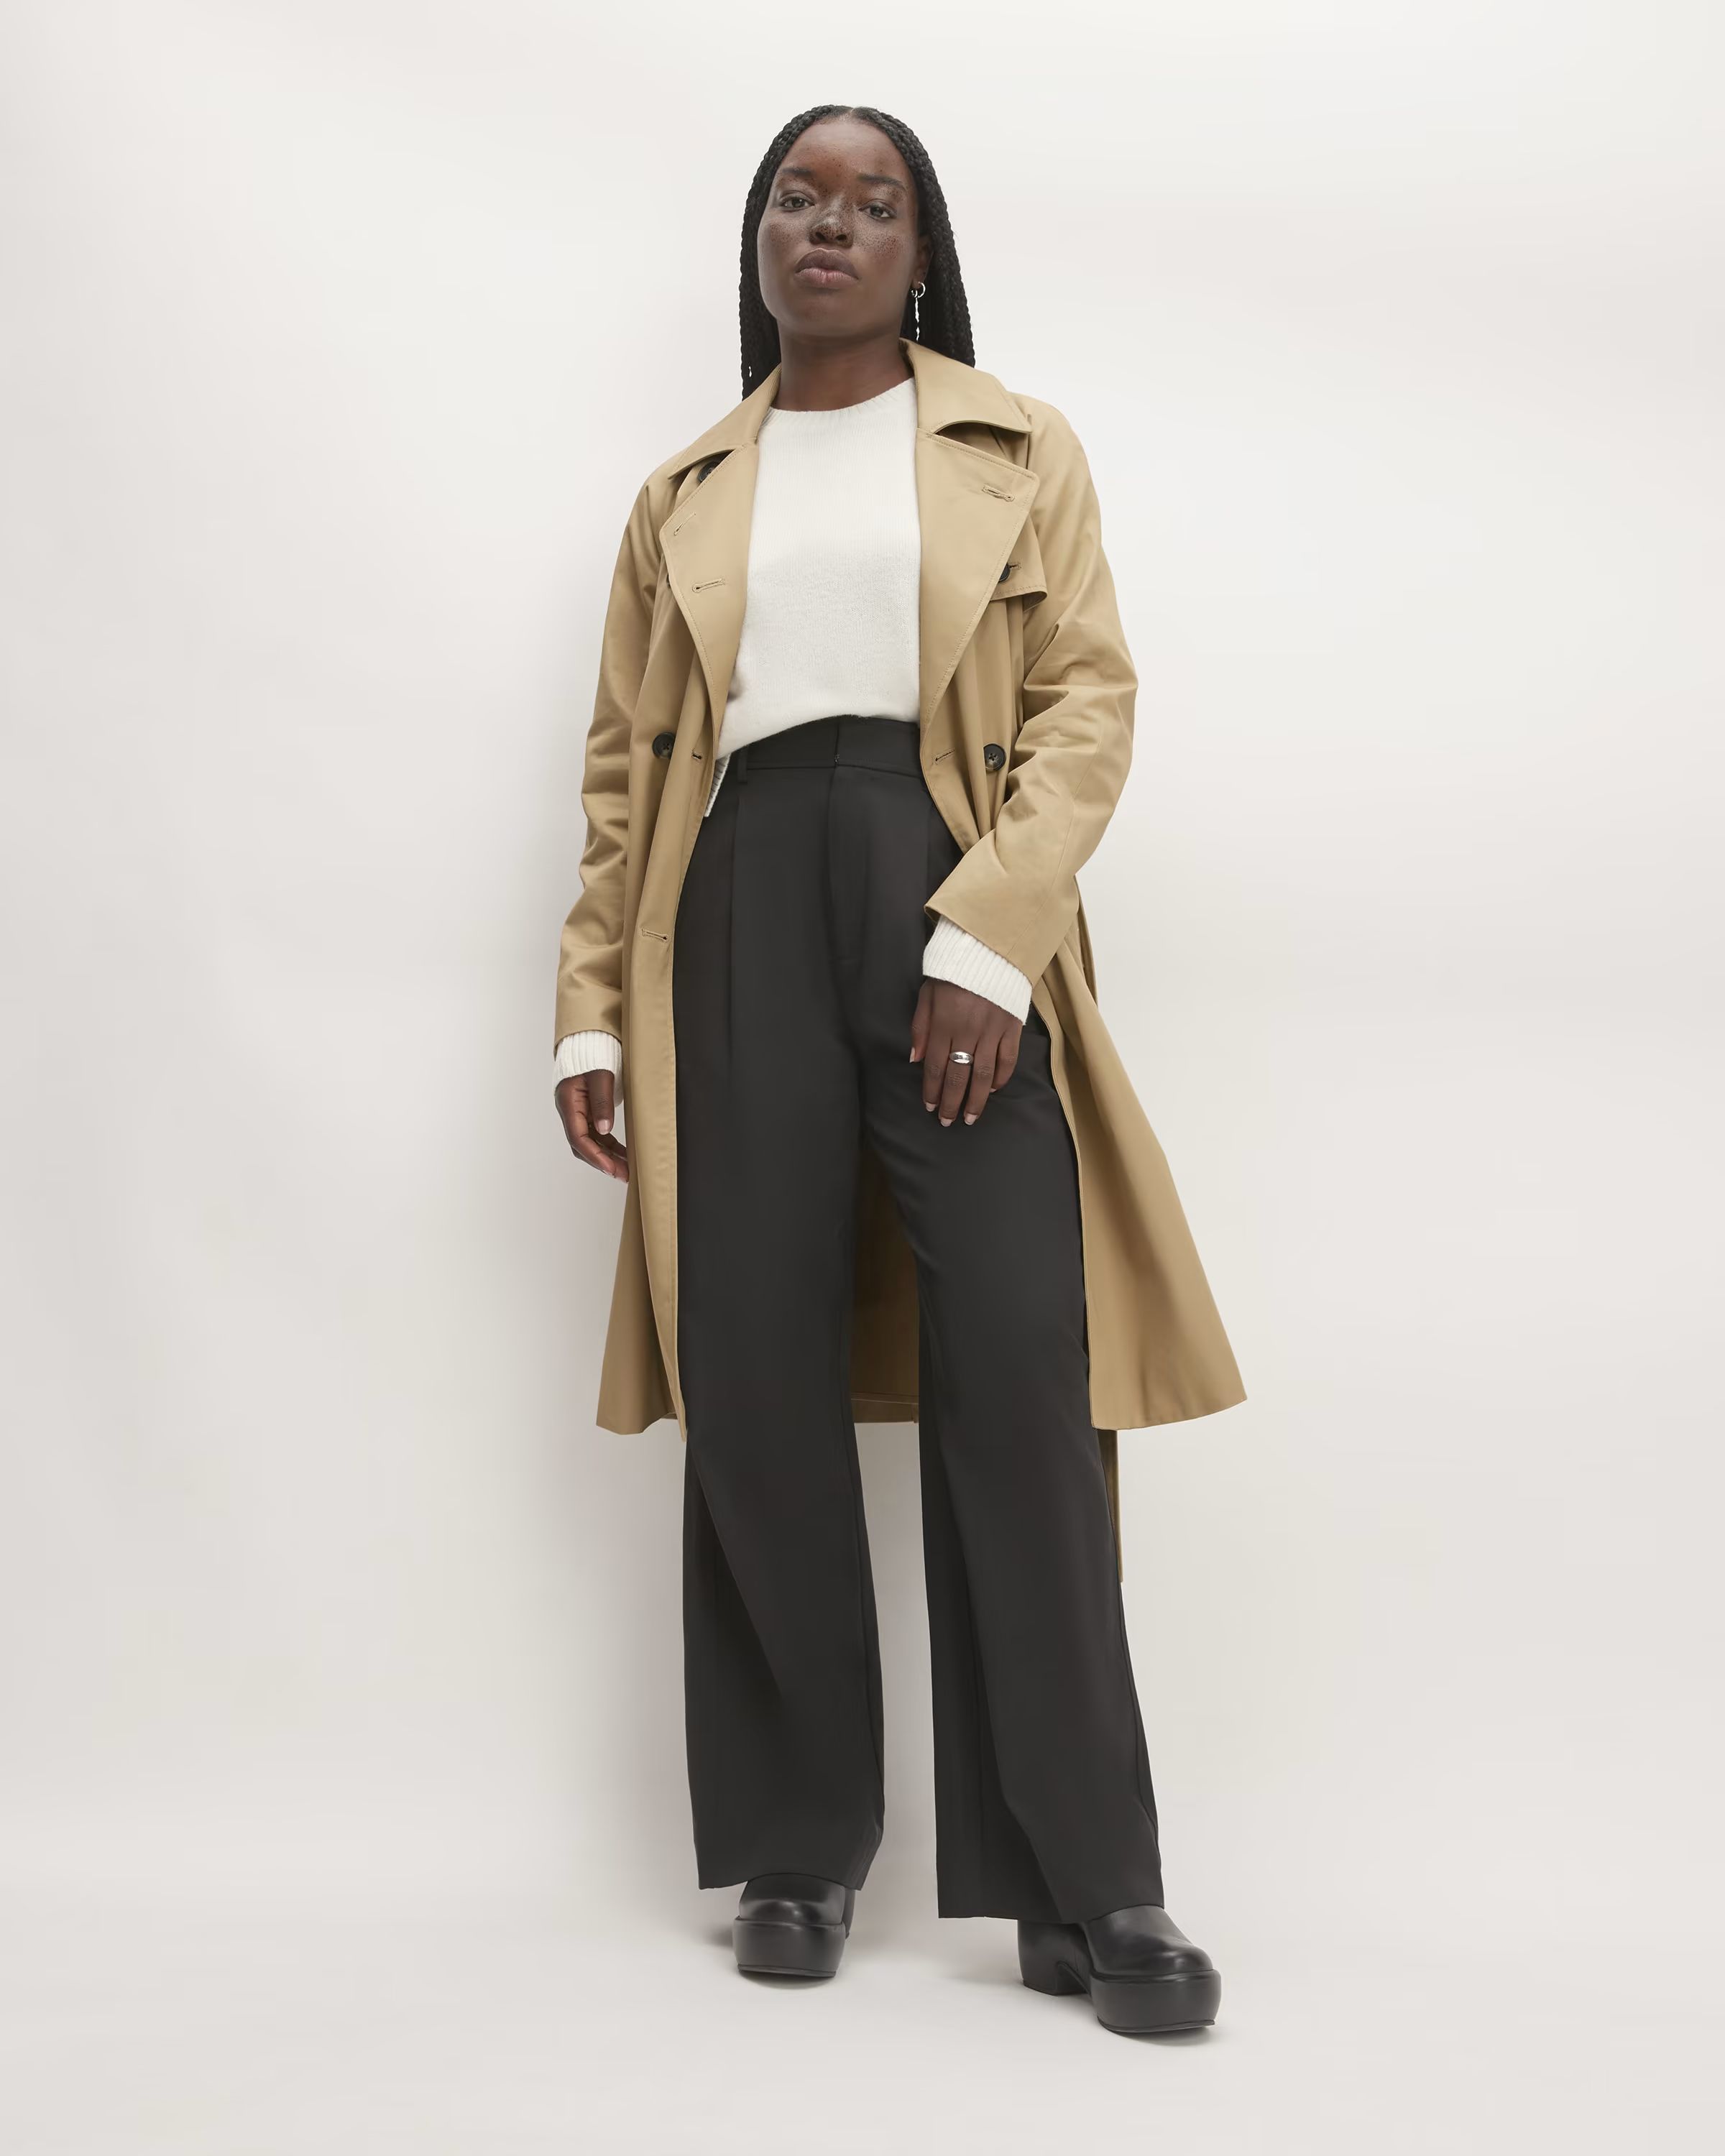 The Cotton Modern Trench Coat | Everlane